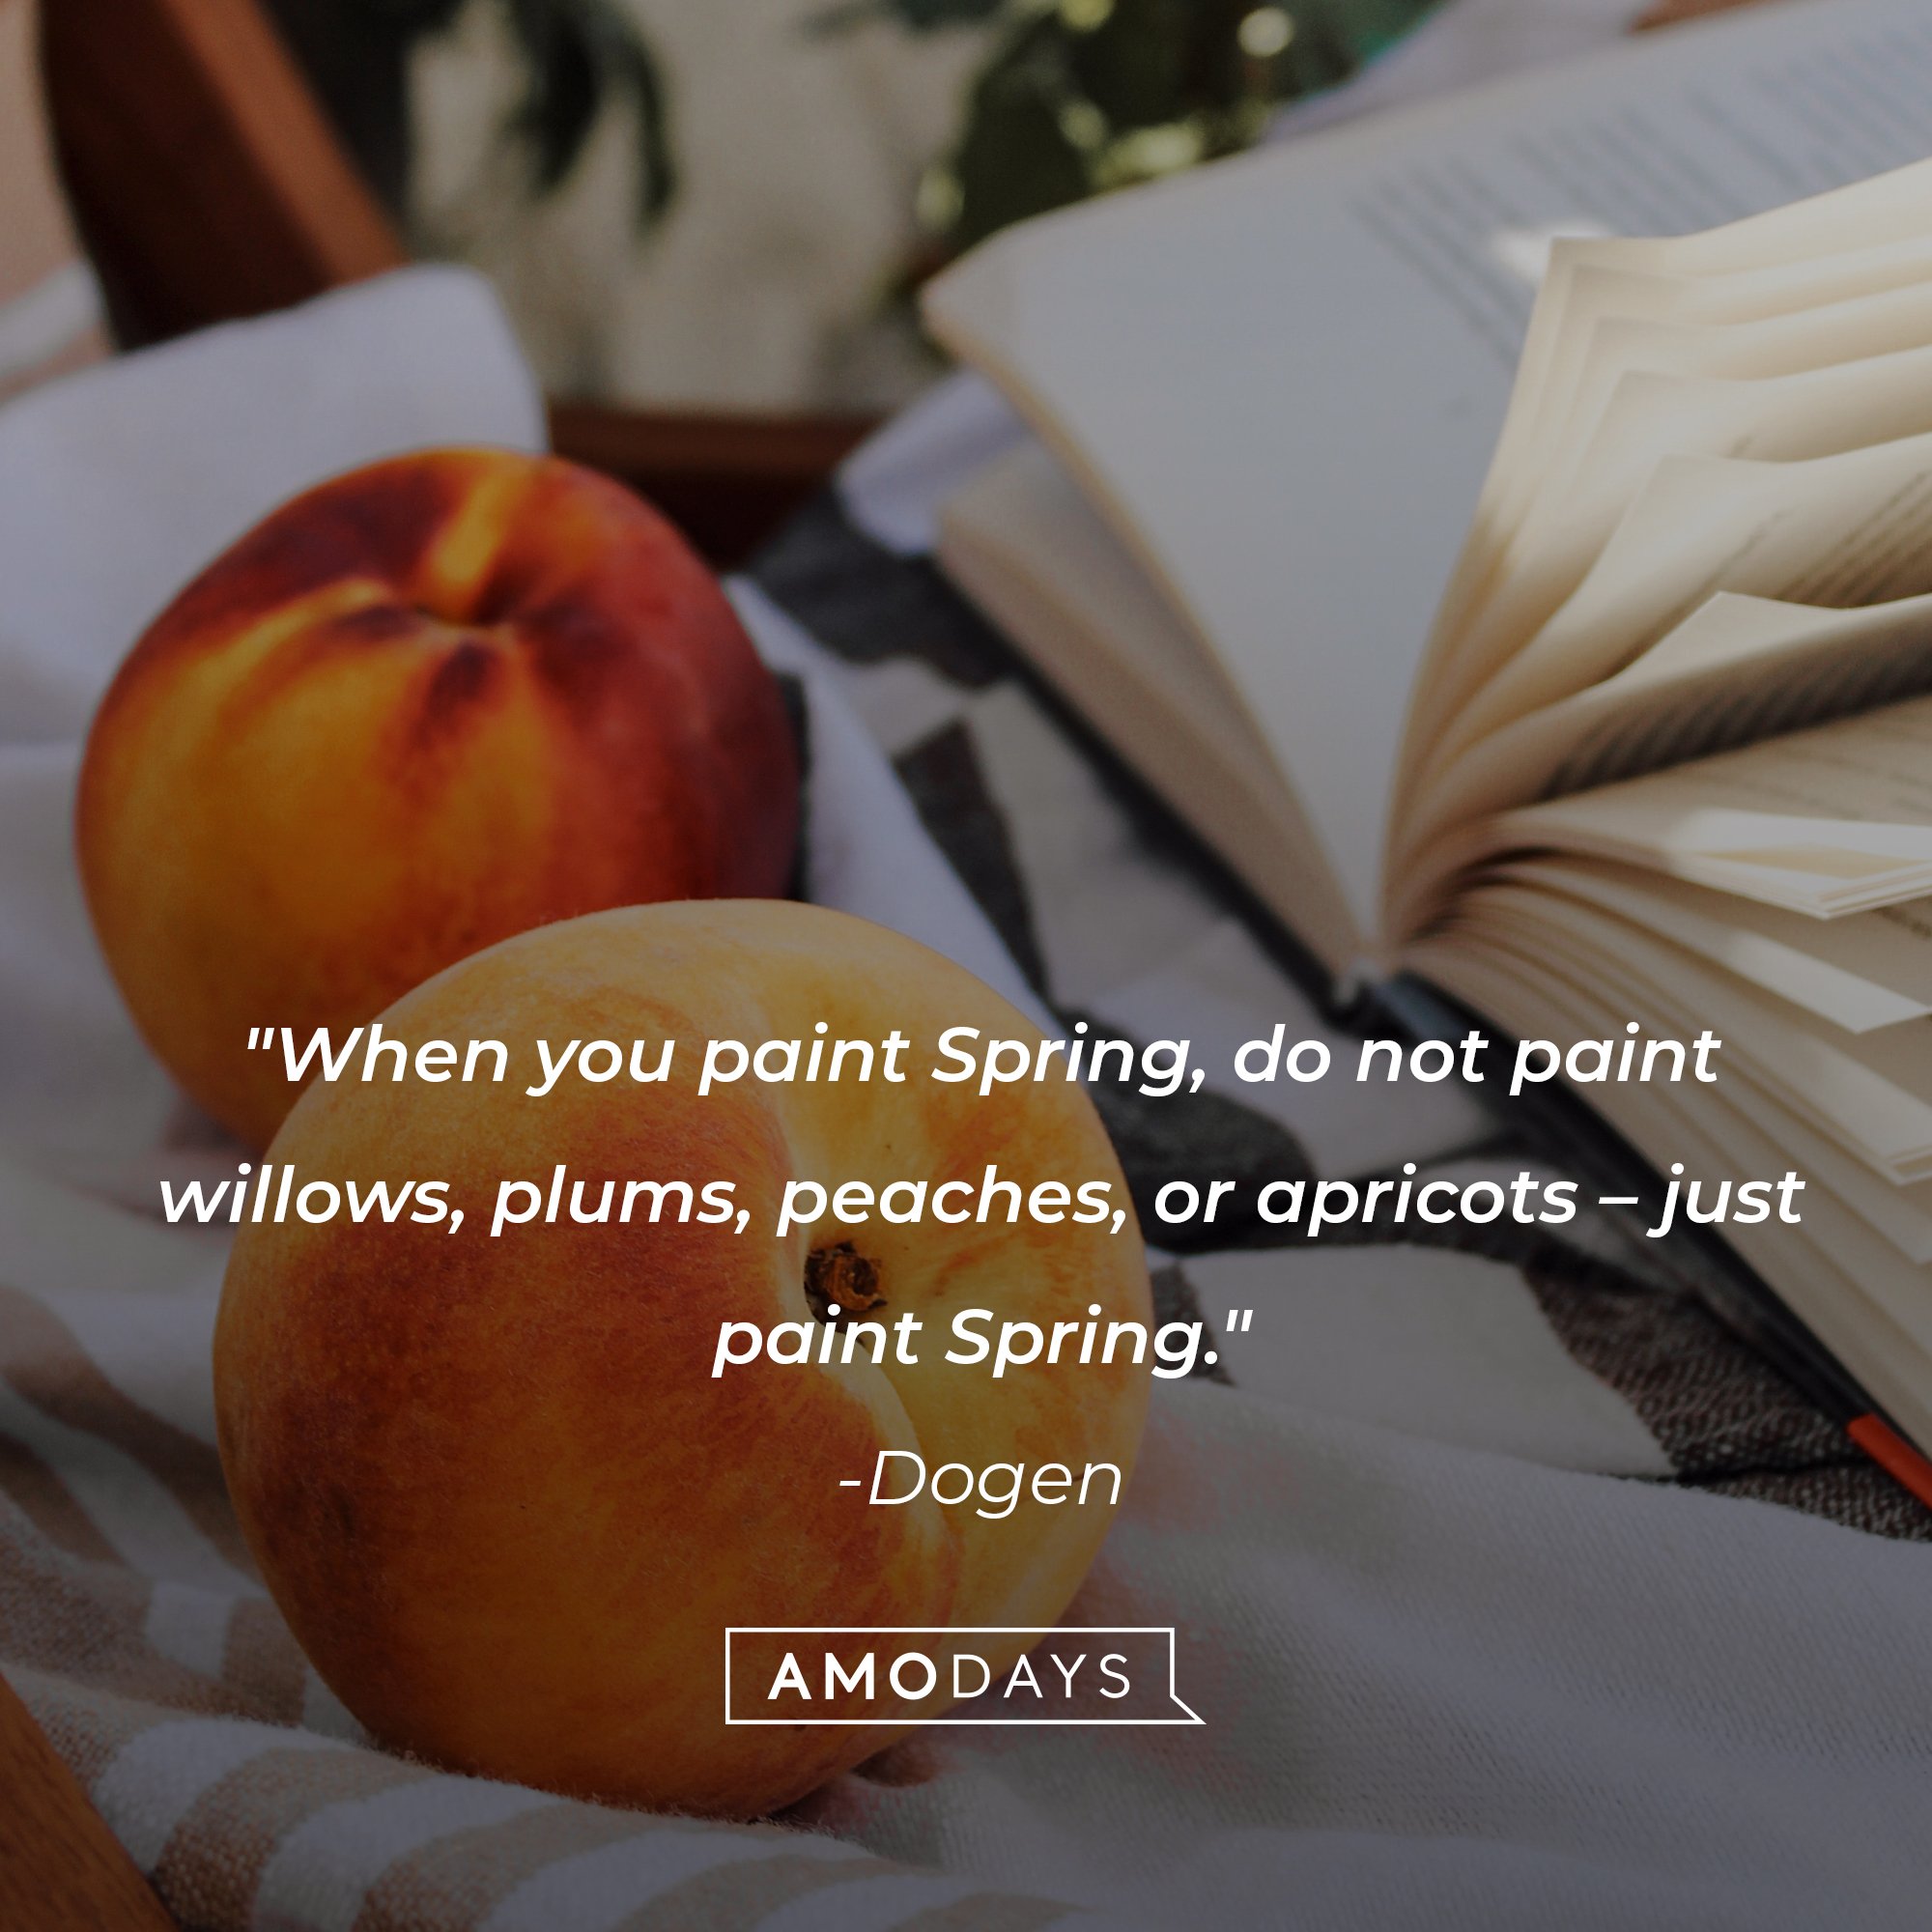 Dogen's quote: "When you paint Spring, do not paint willows, plums, peaches, or apricots – just paint Spring." | Image: AmoDays